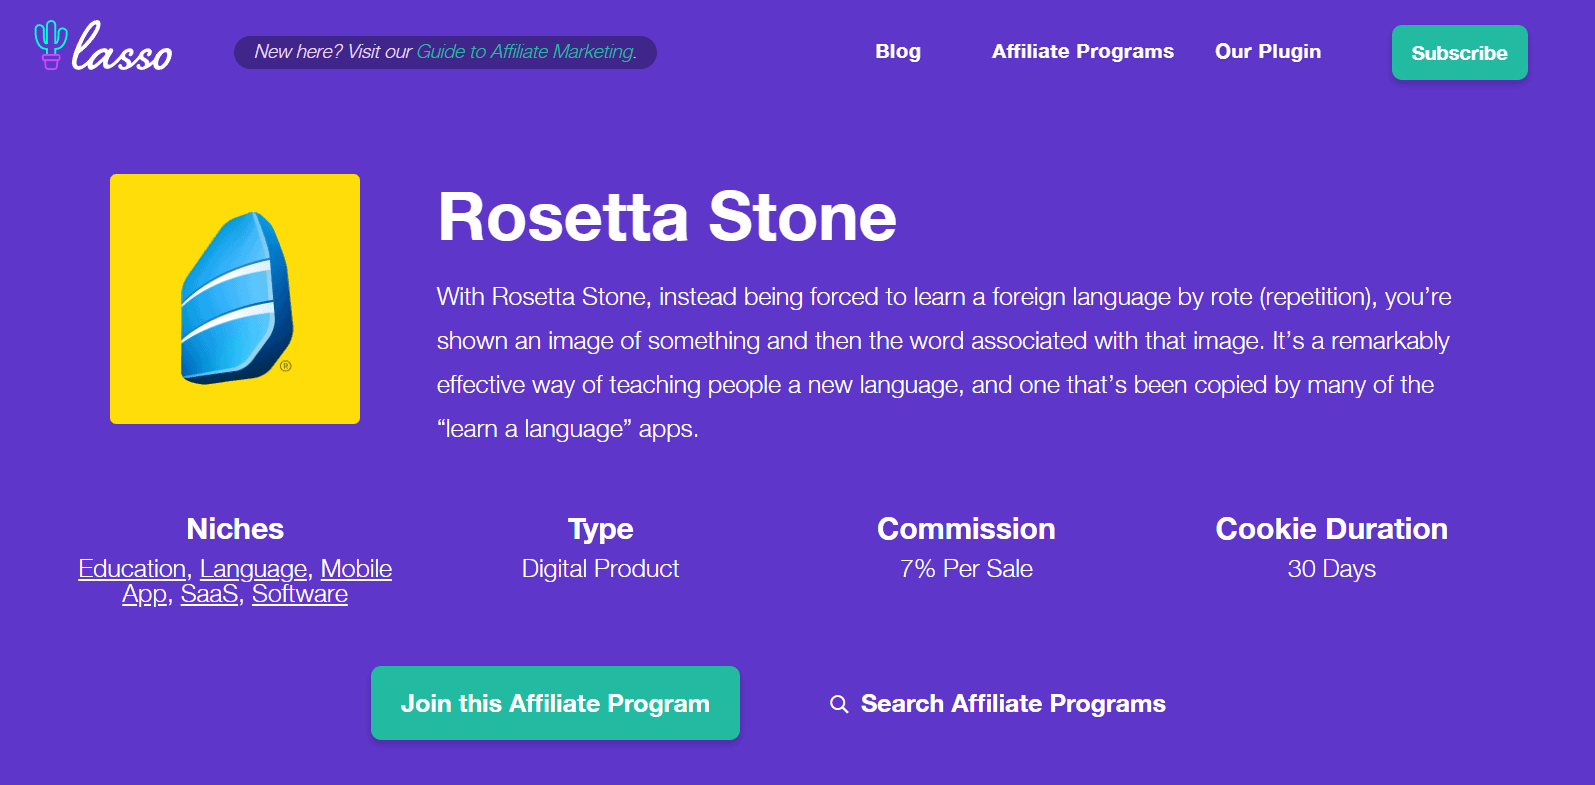 Overview Of Rosetta Stone